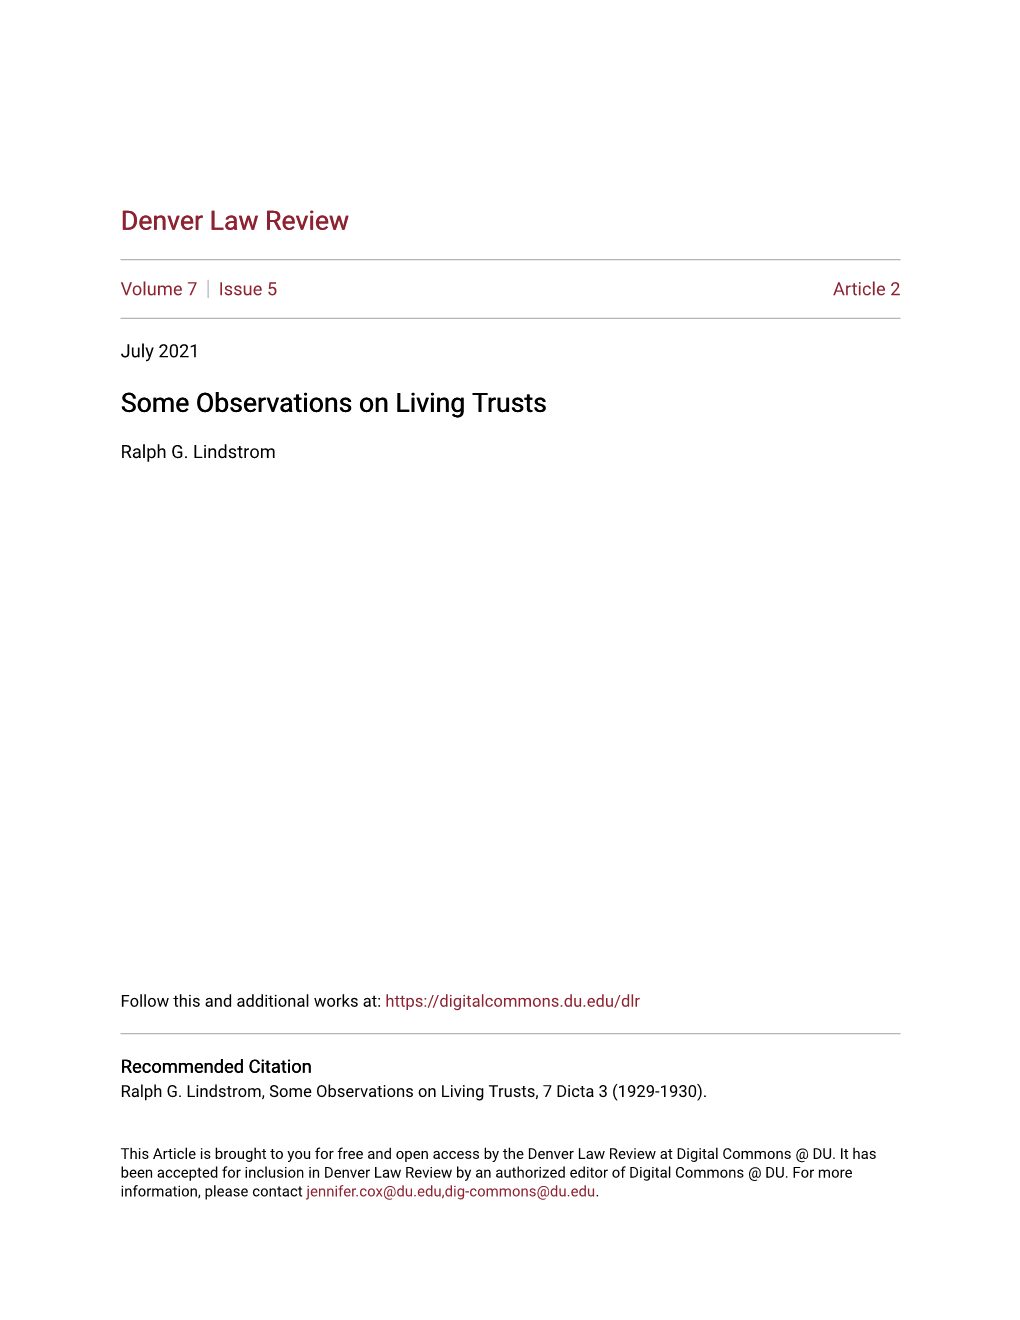 Some Observations on Living Trusts